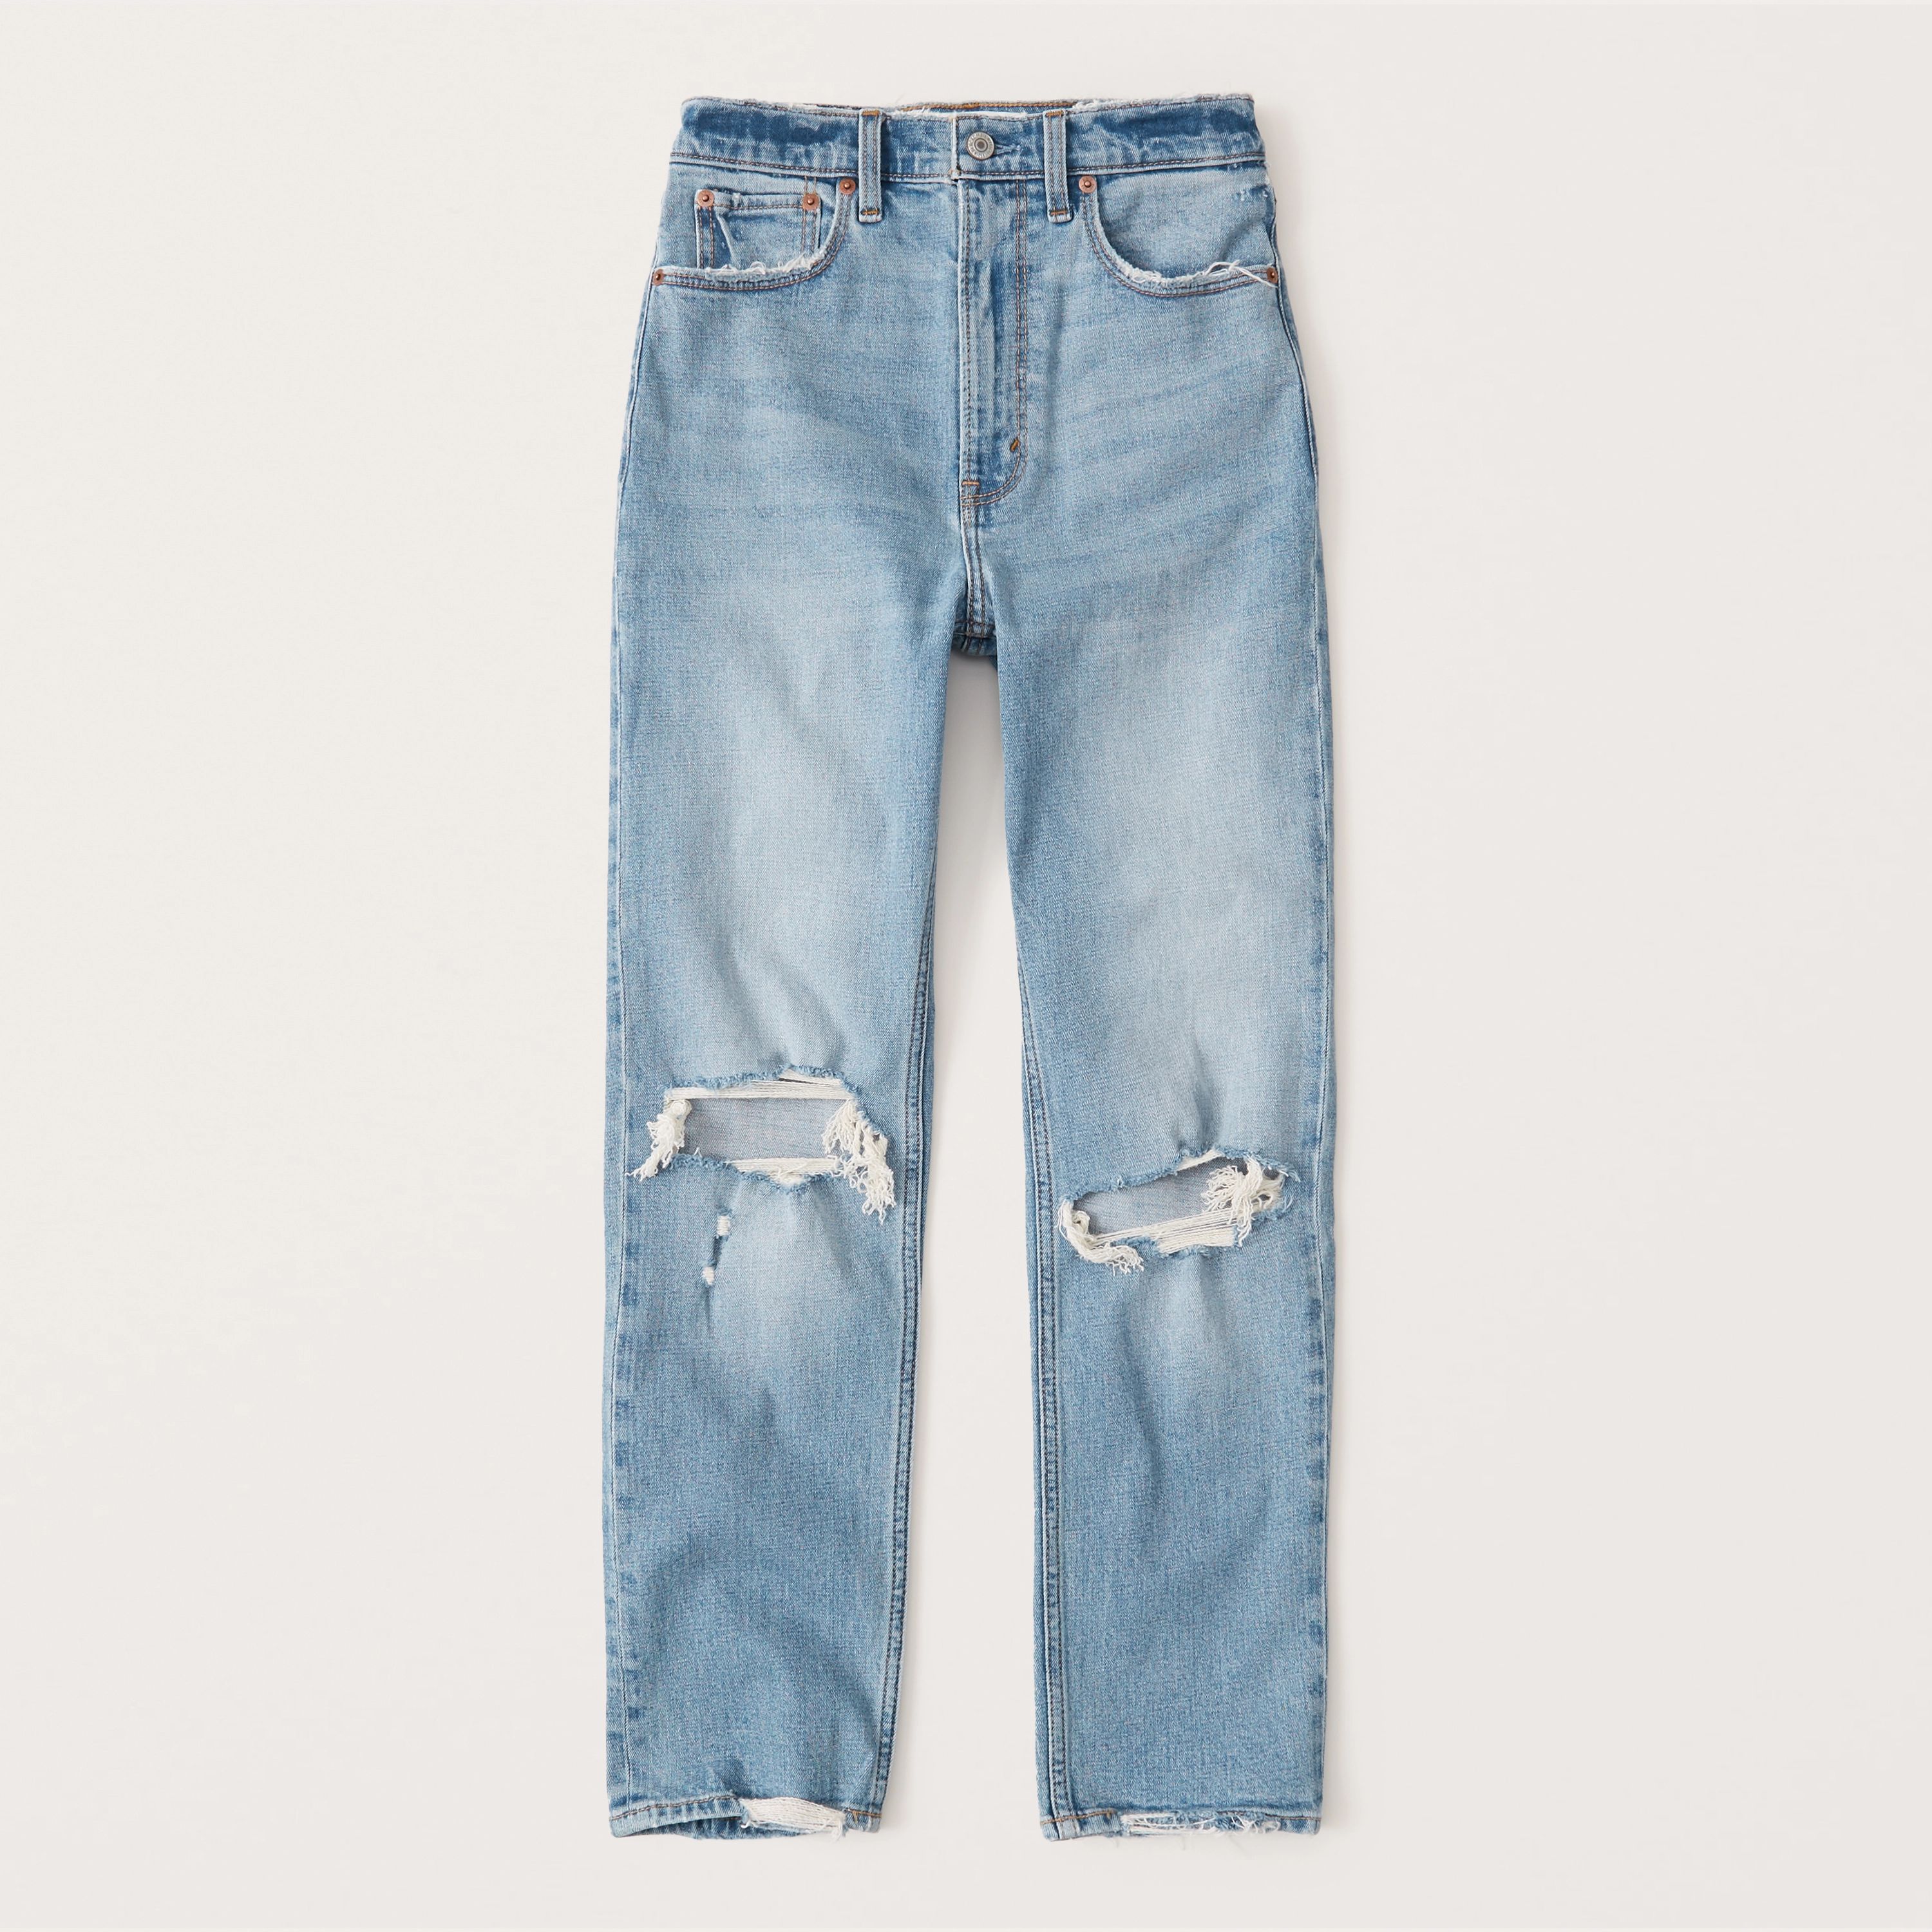 A&F Vintage Stretch Denim
			


  
						
							Ultra High Rise Ankle Straight Jeans
						
				... | Abercrombie & Fitch (US)